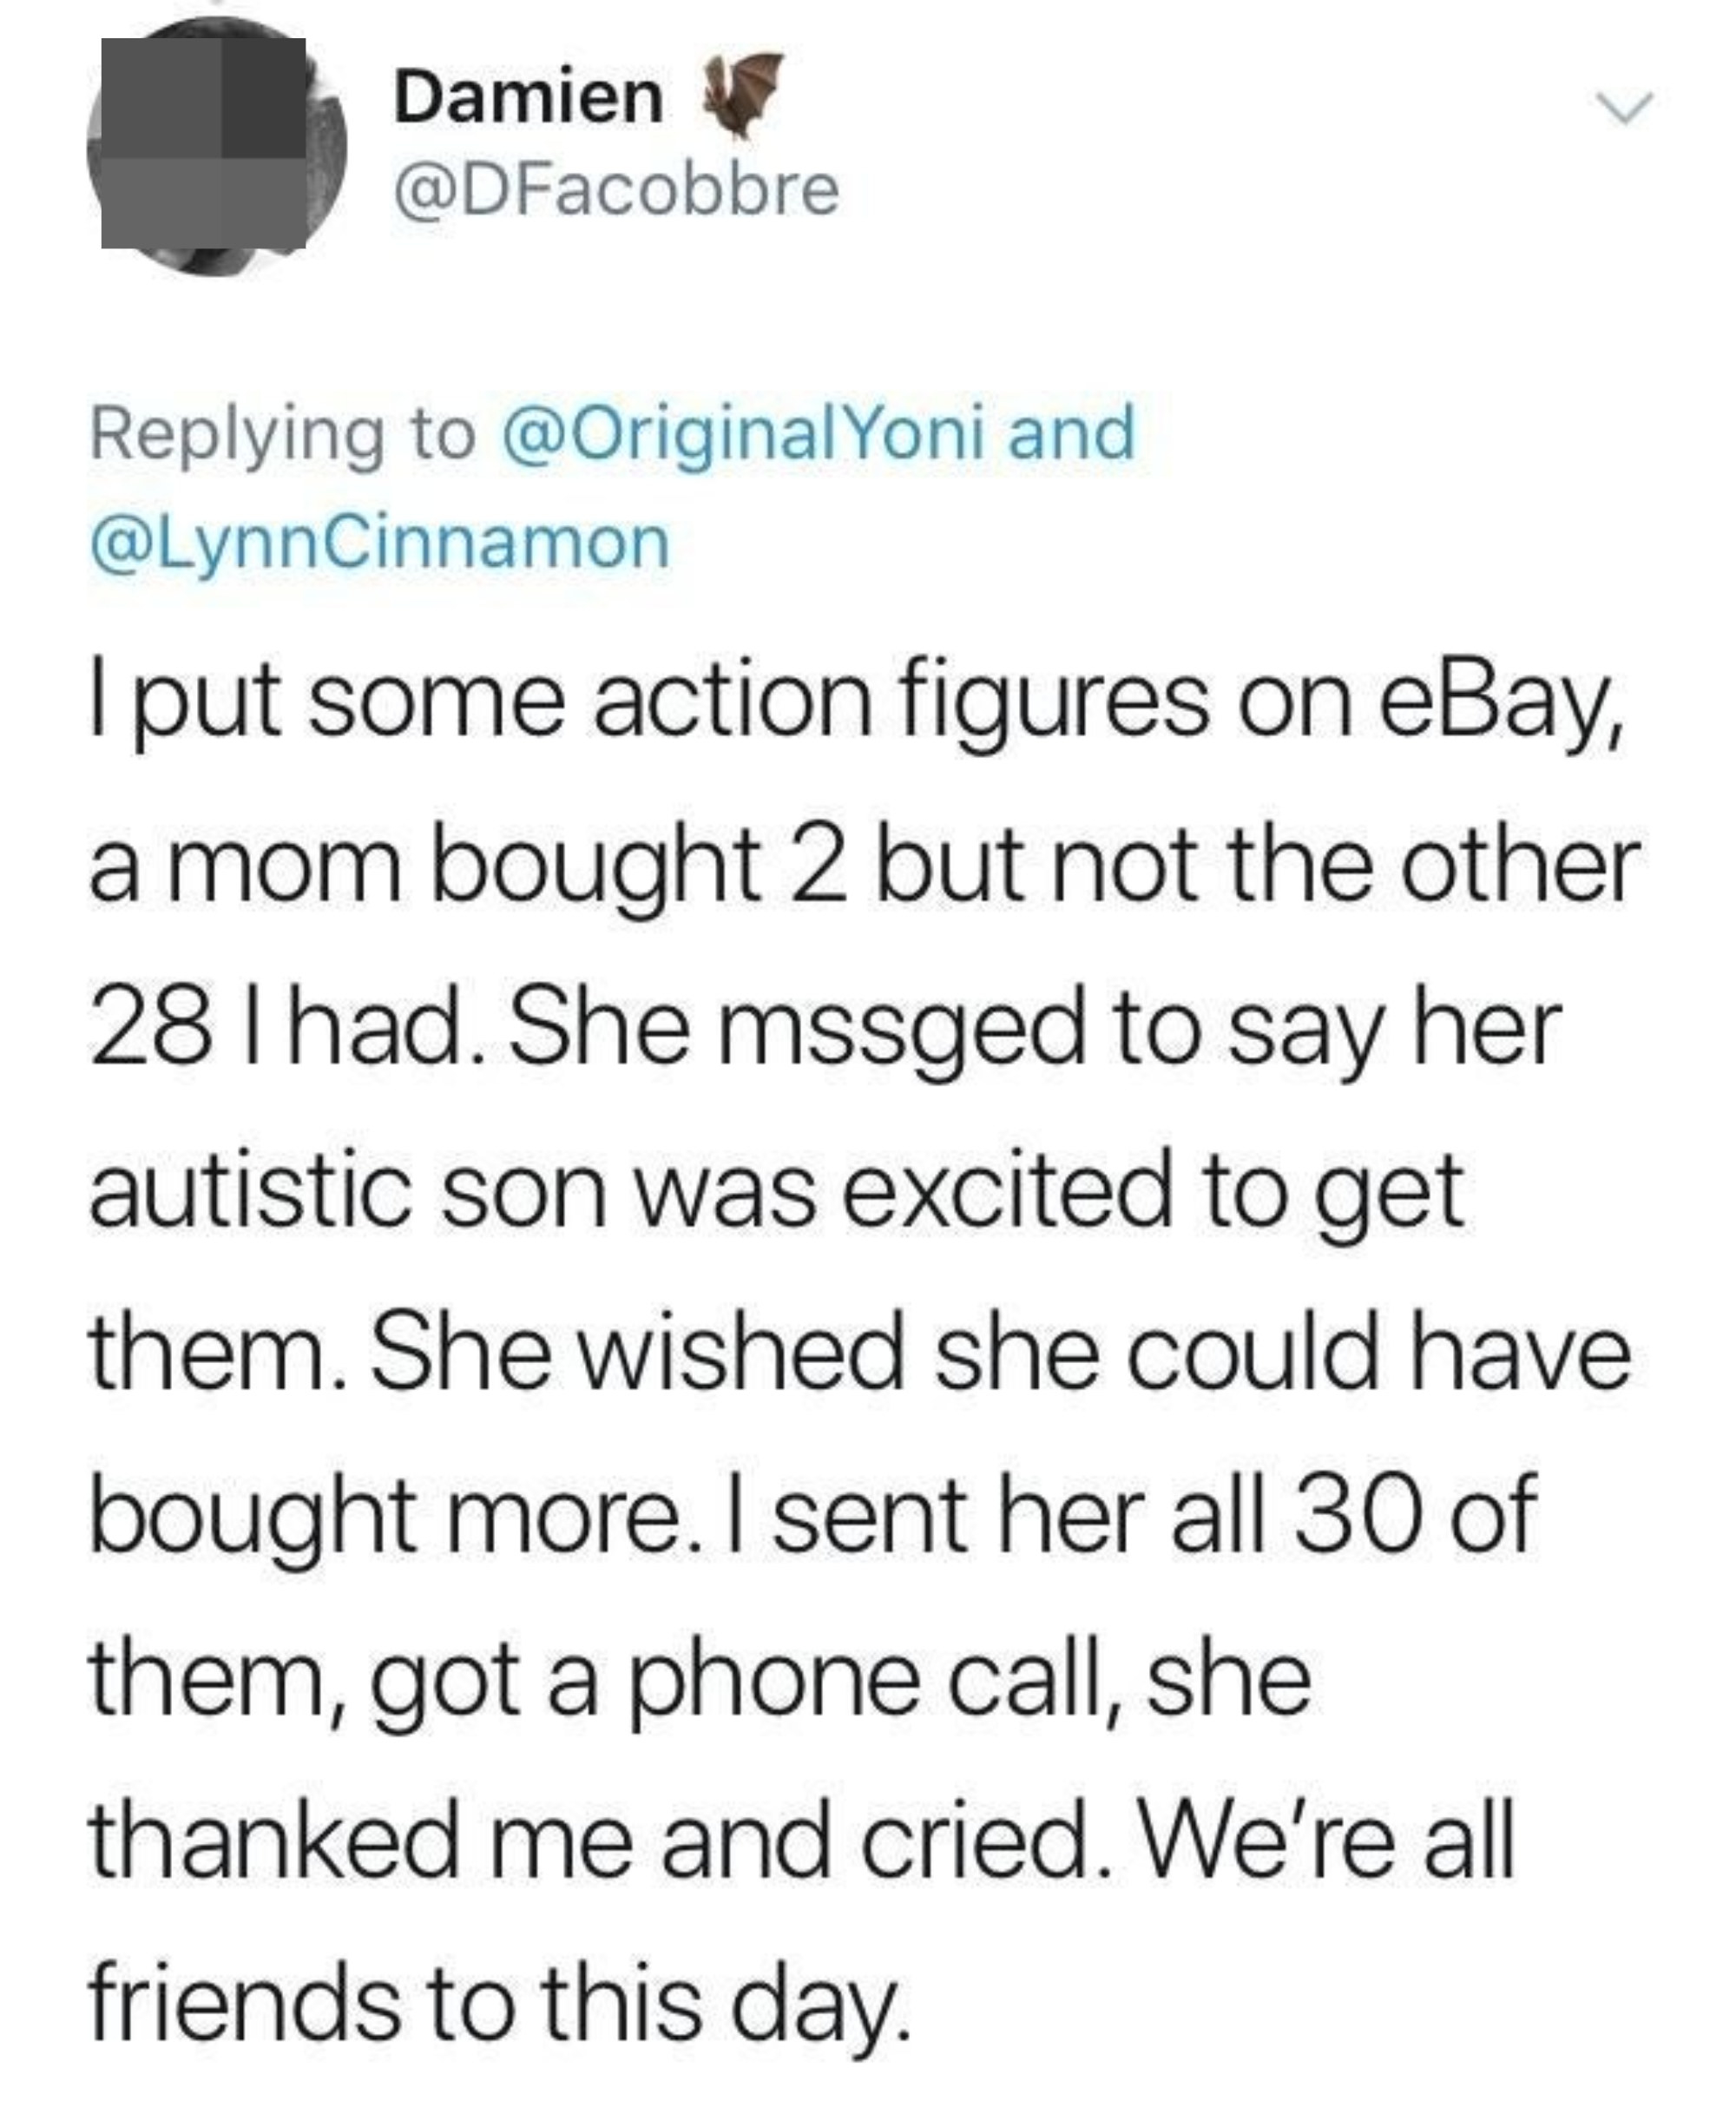 Person selling 30 action figures on eBay sold 2 to a mom for her autistic son who said she wished she could get all 30 for him; the person ended up sending her all 30, and the mom called them, thanked them, and cried, and they&#x27;re friends to this day